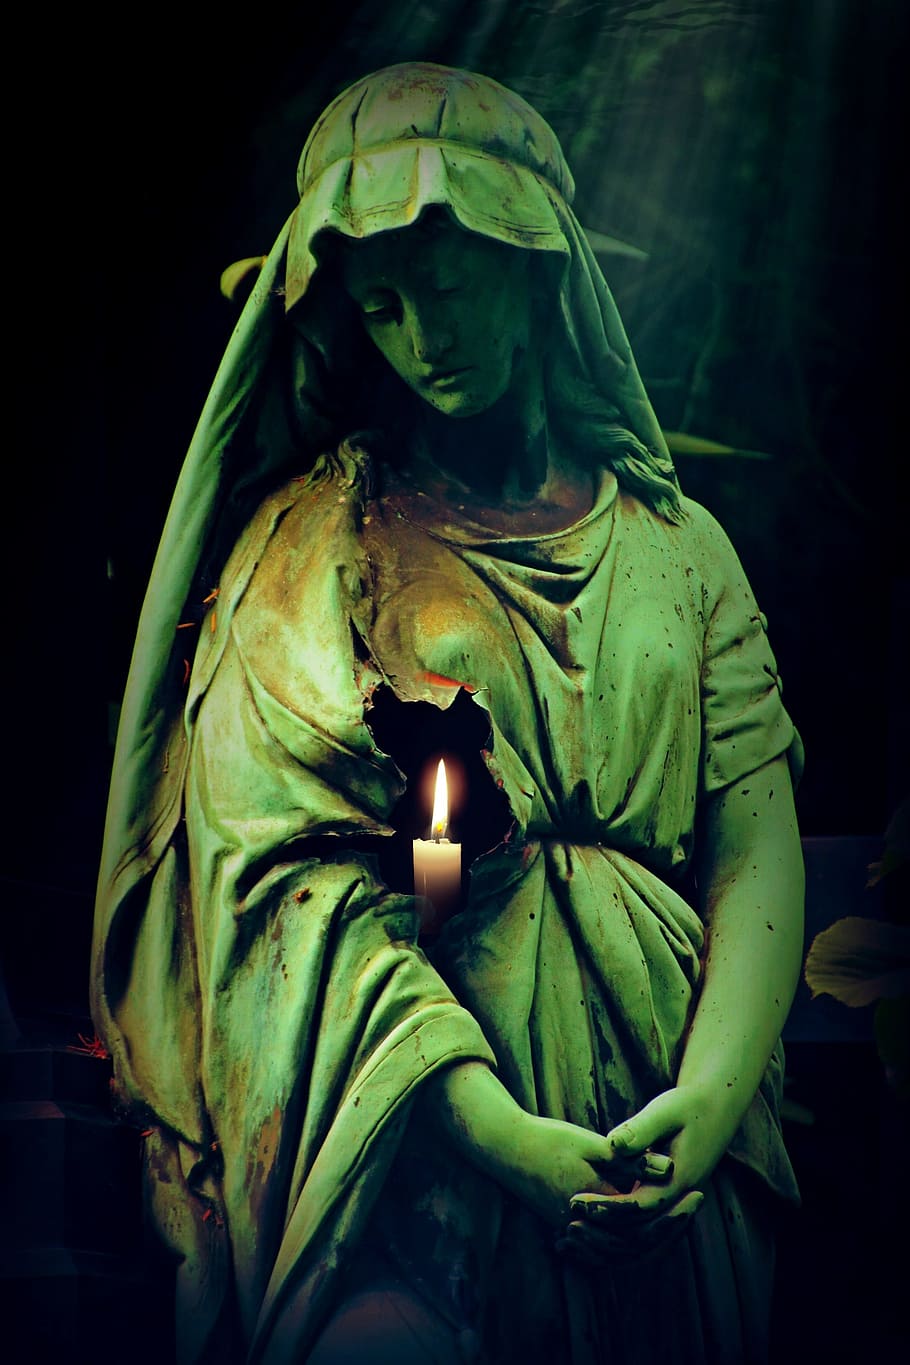 woman statue, candle wallpaper, woman, sculpture, figure, cemetery, grave, tomb, mourning, hope